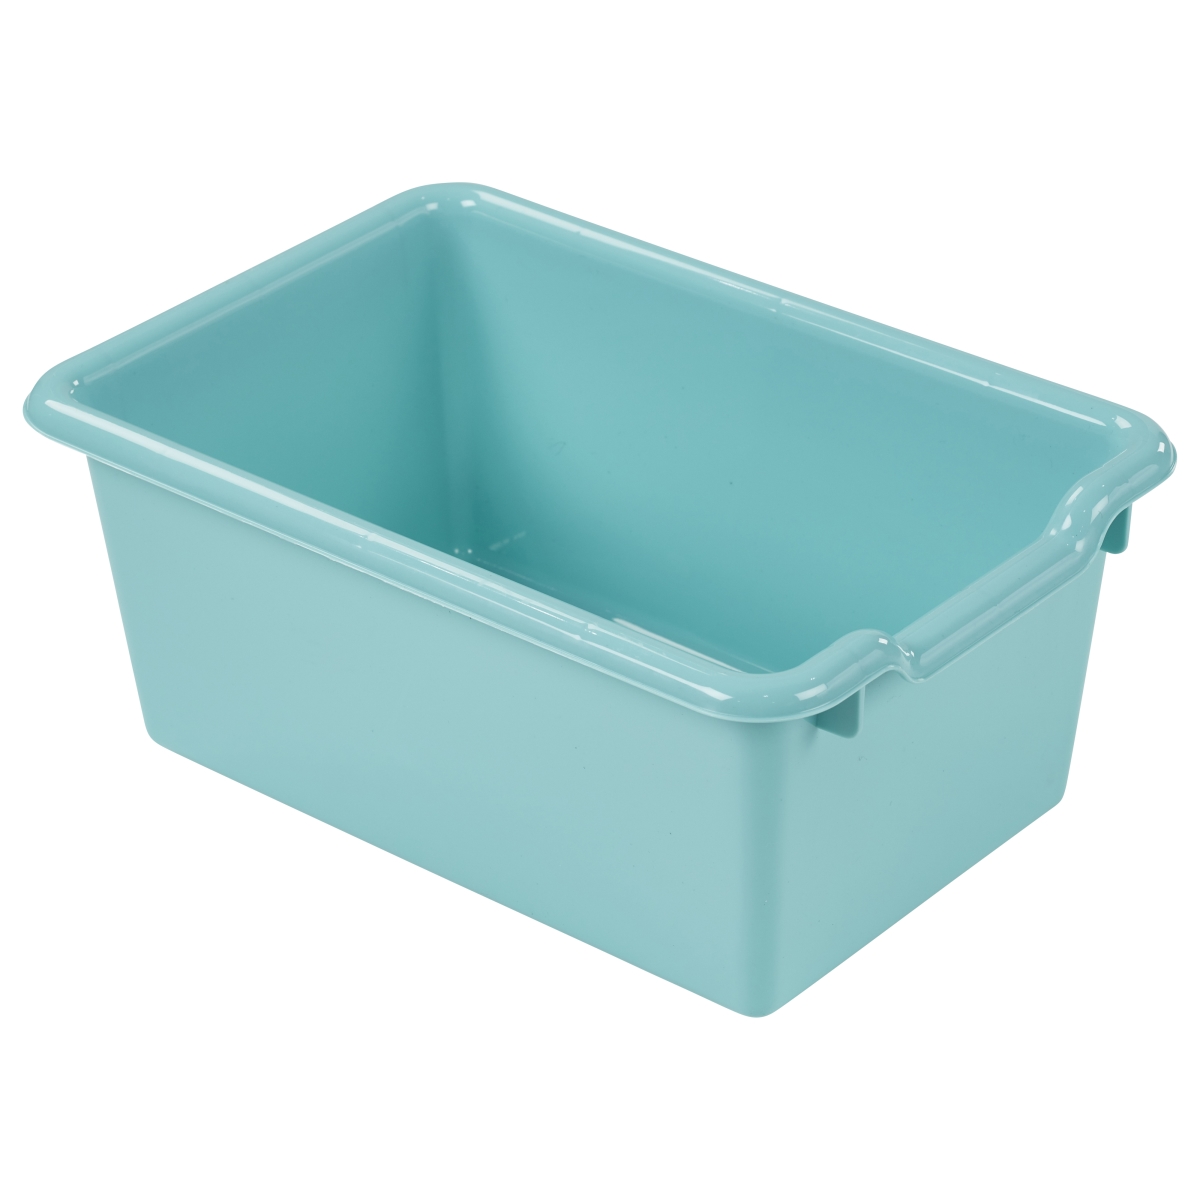 Elr-0482-tq 11.50 X 8 X 5 In. Scoop Front Storage Bins - Turquoise Case Pack Of 10